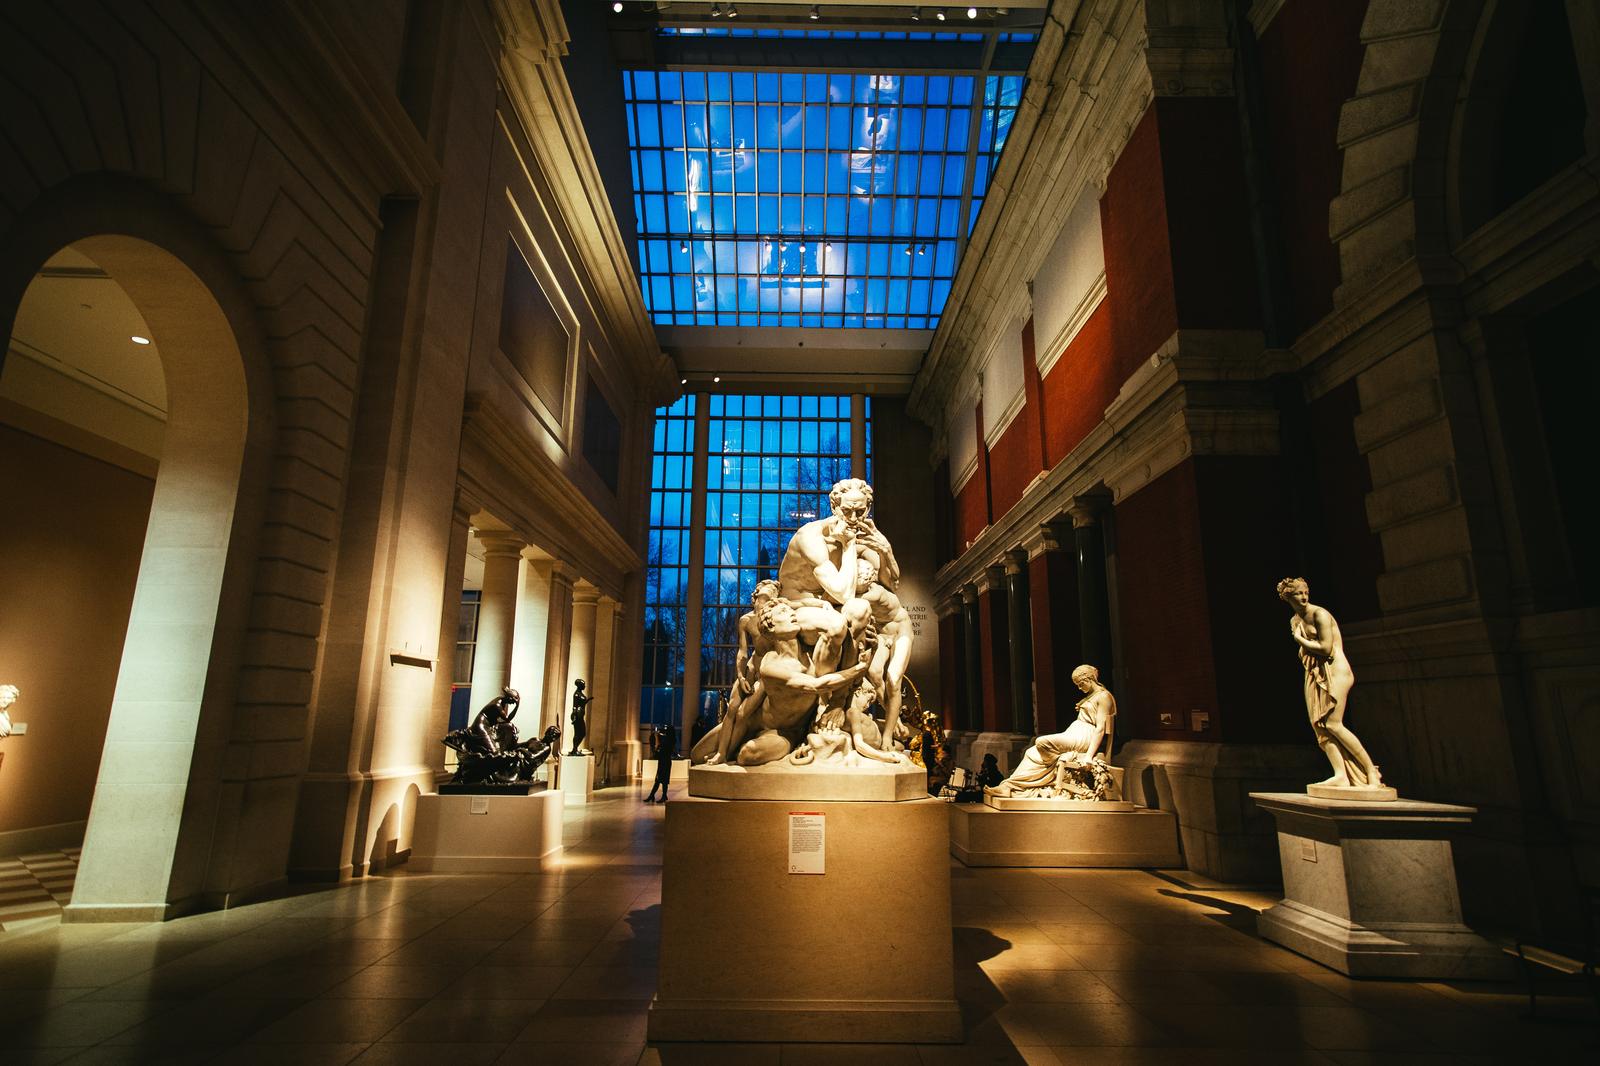 NYC Trip Planning Quiz 🗽: Can We Guess Your Age? Metropolitan Museum of Art, New York